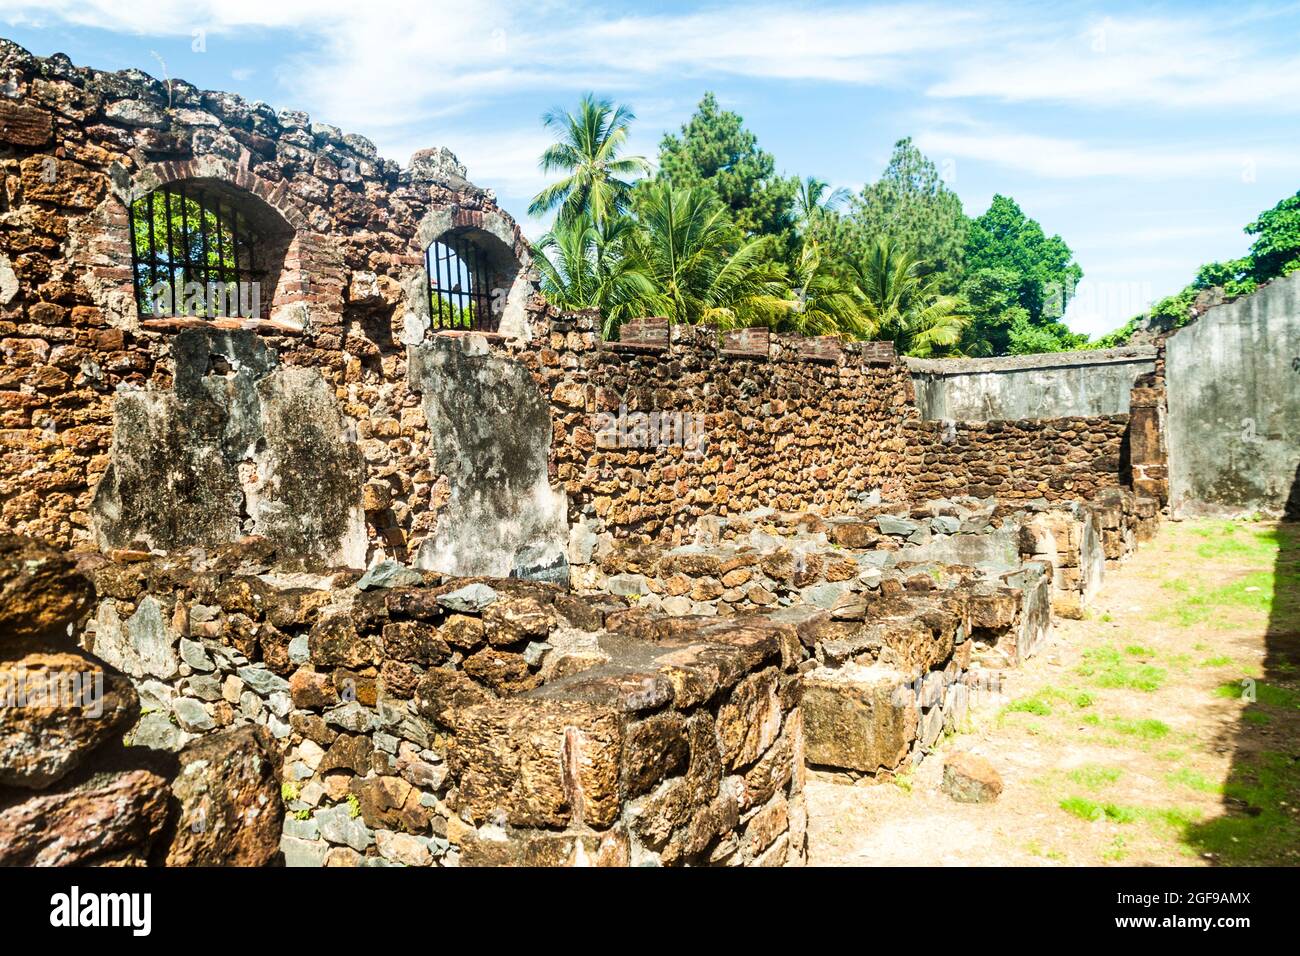 Ruins of former penal colony at Ile Royale, one of the islands of Iles du Salut (Islands of Salvation) in French Guiana Stock Photo